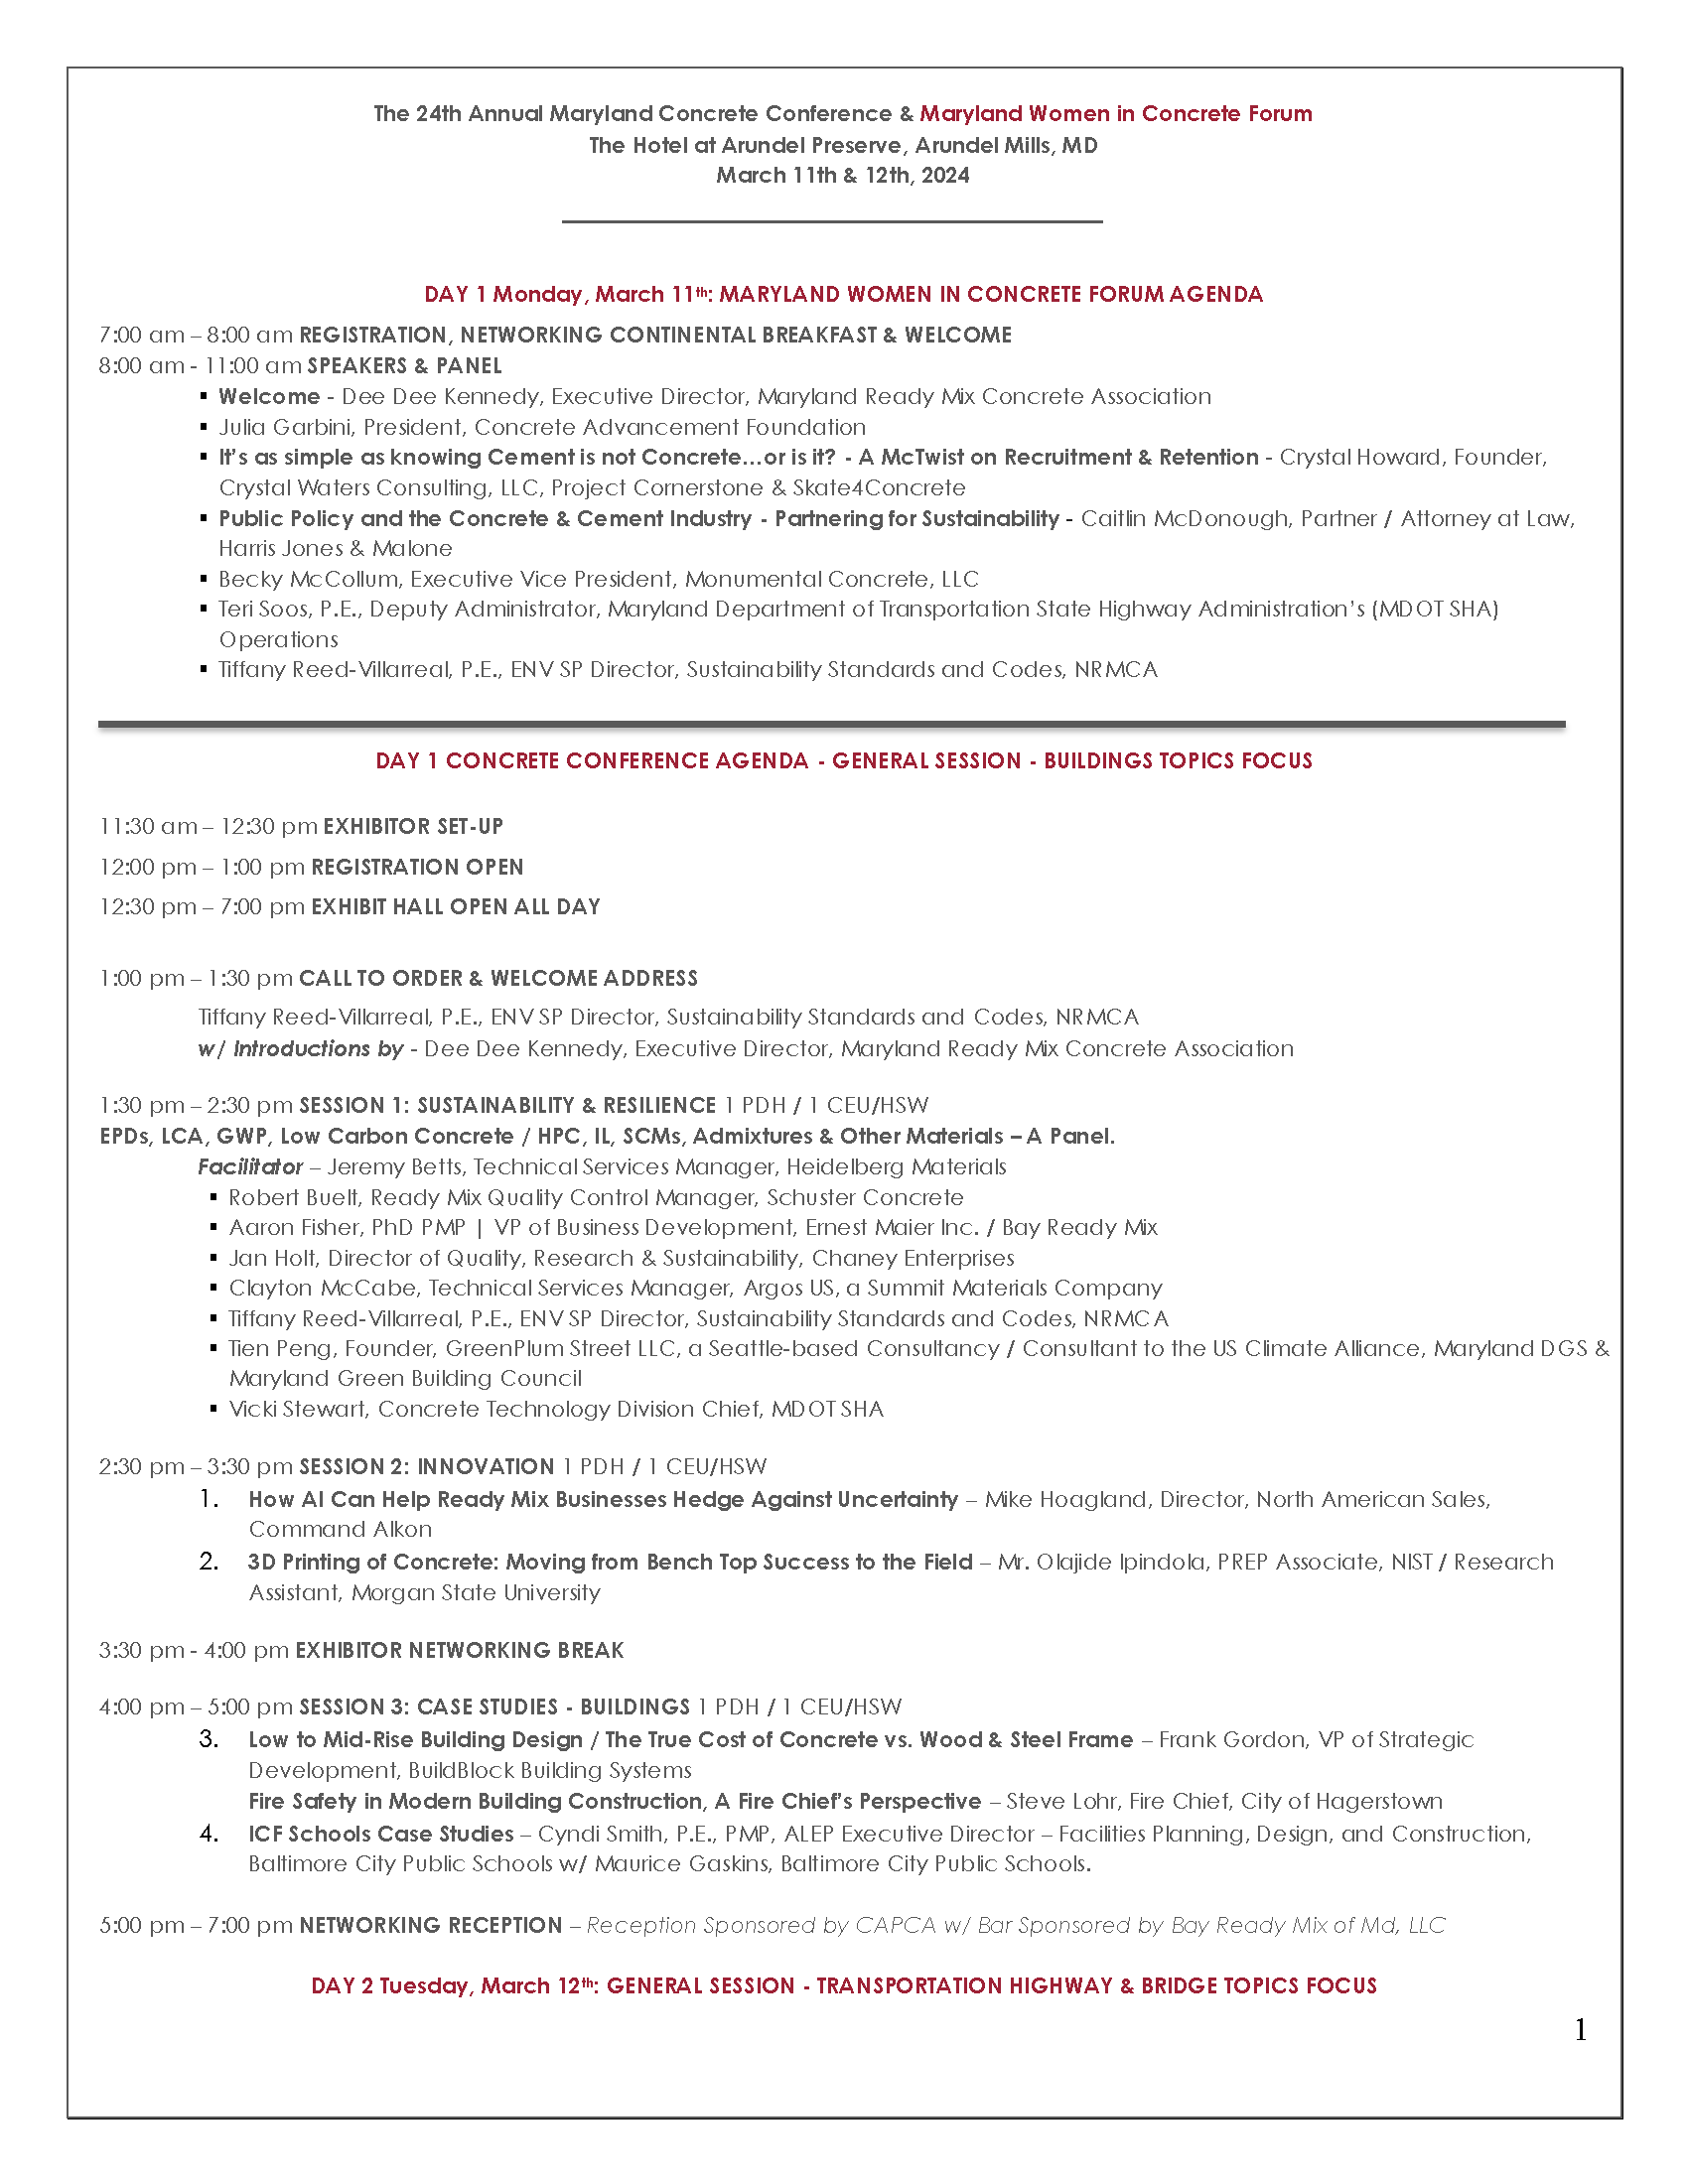 24th Maryland Concrete Conference & Women in Concrete Forum Agendas 3-6-2024_Page_1